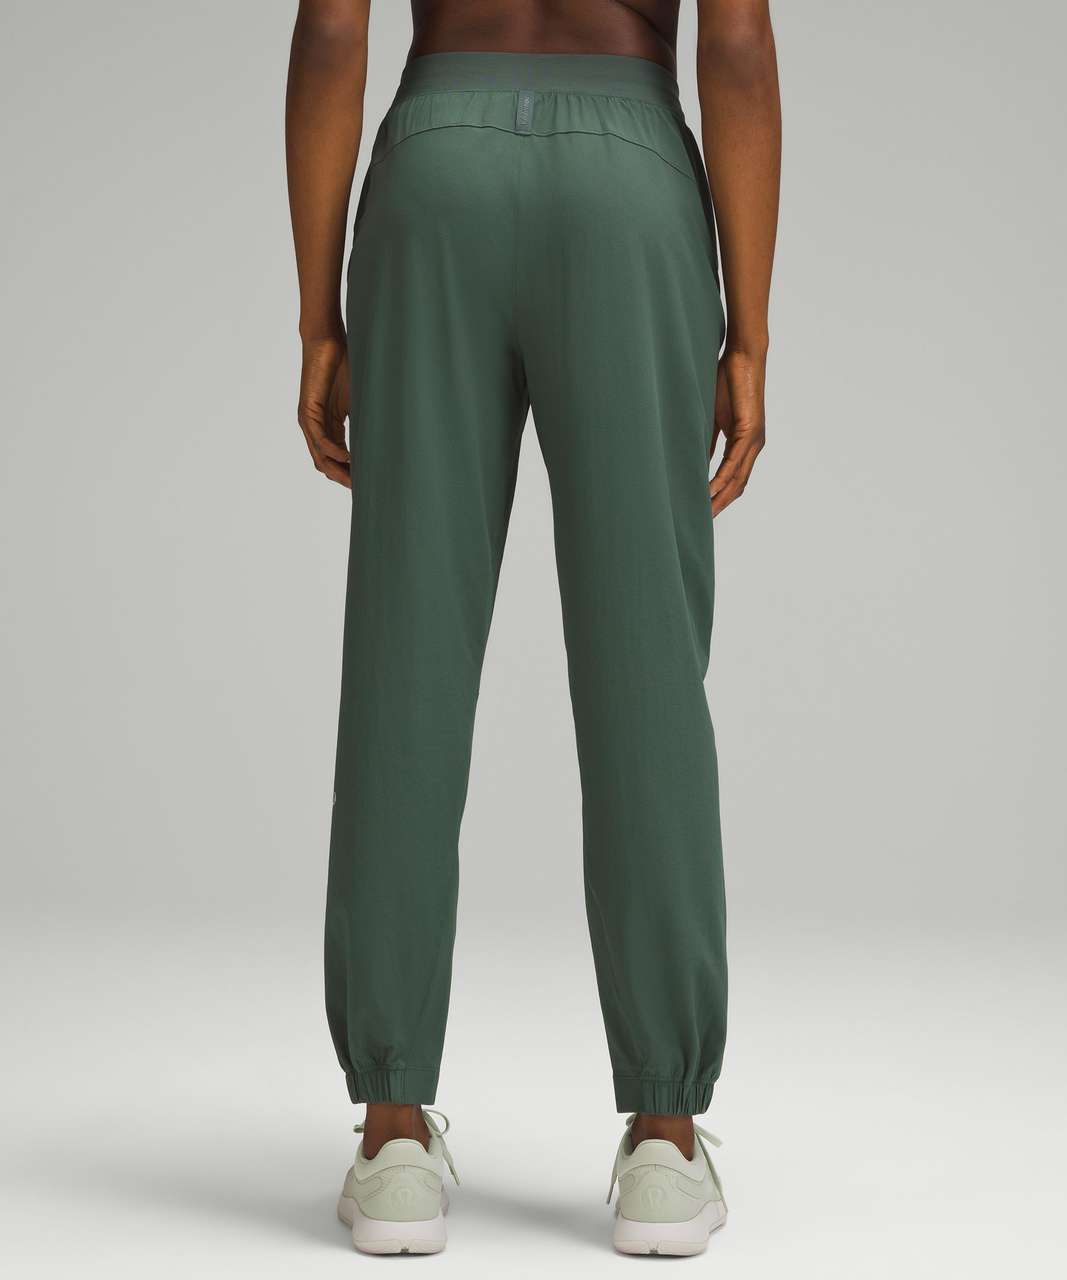 Lululemon License to Train High-Rise Pant - Dark Forest